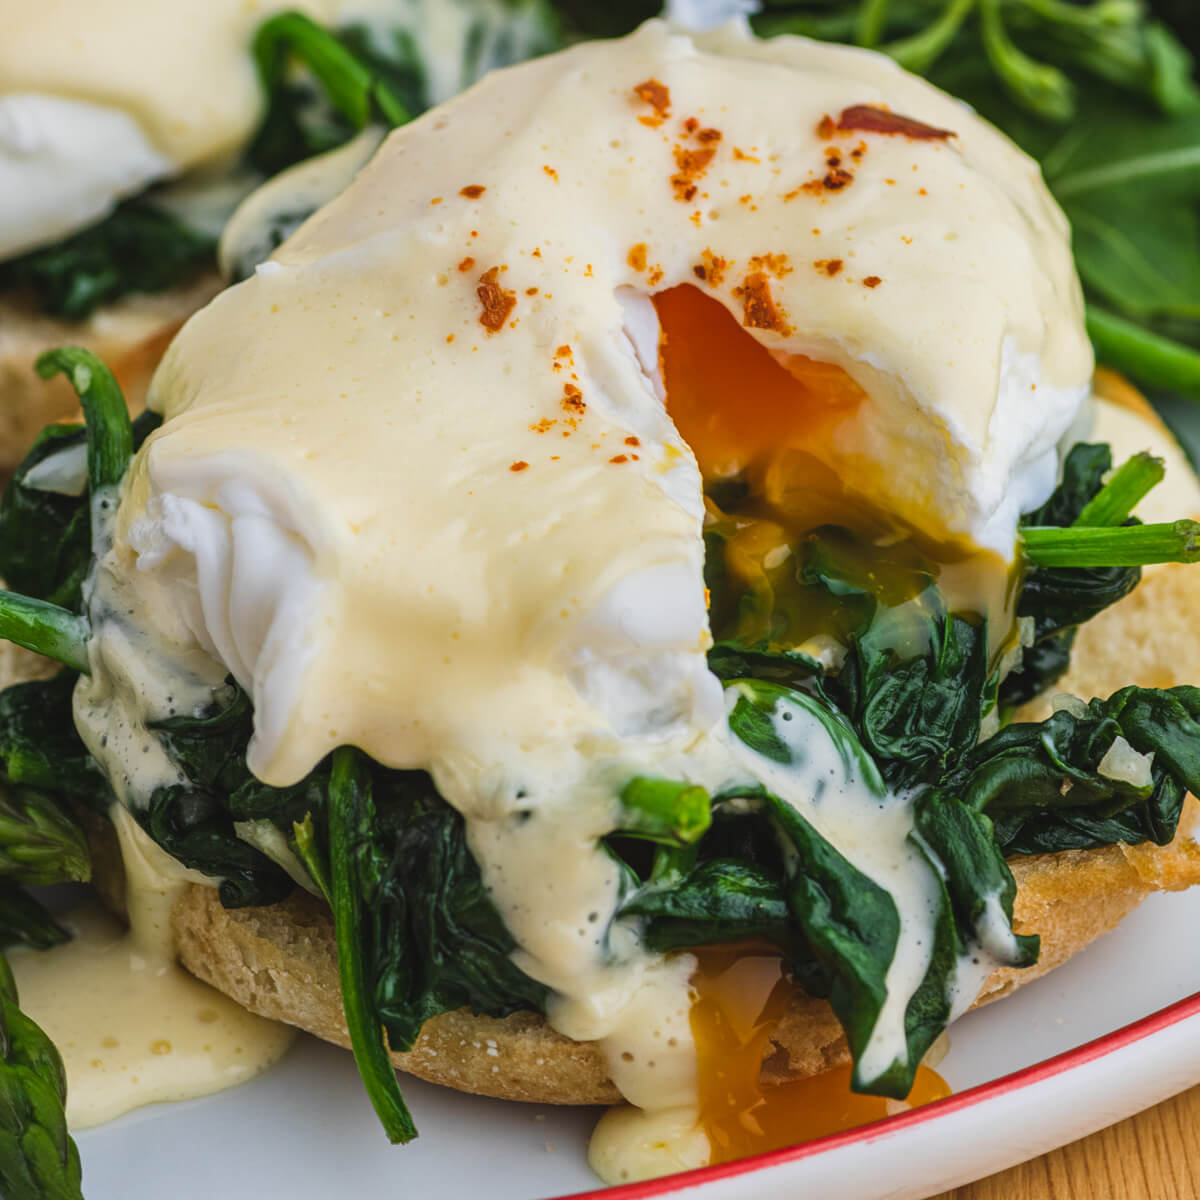 An Eggs Benedict Florentine with runny yolk.